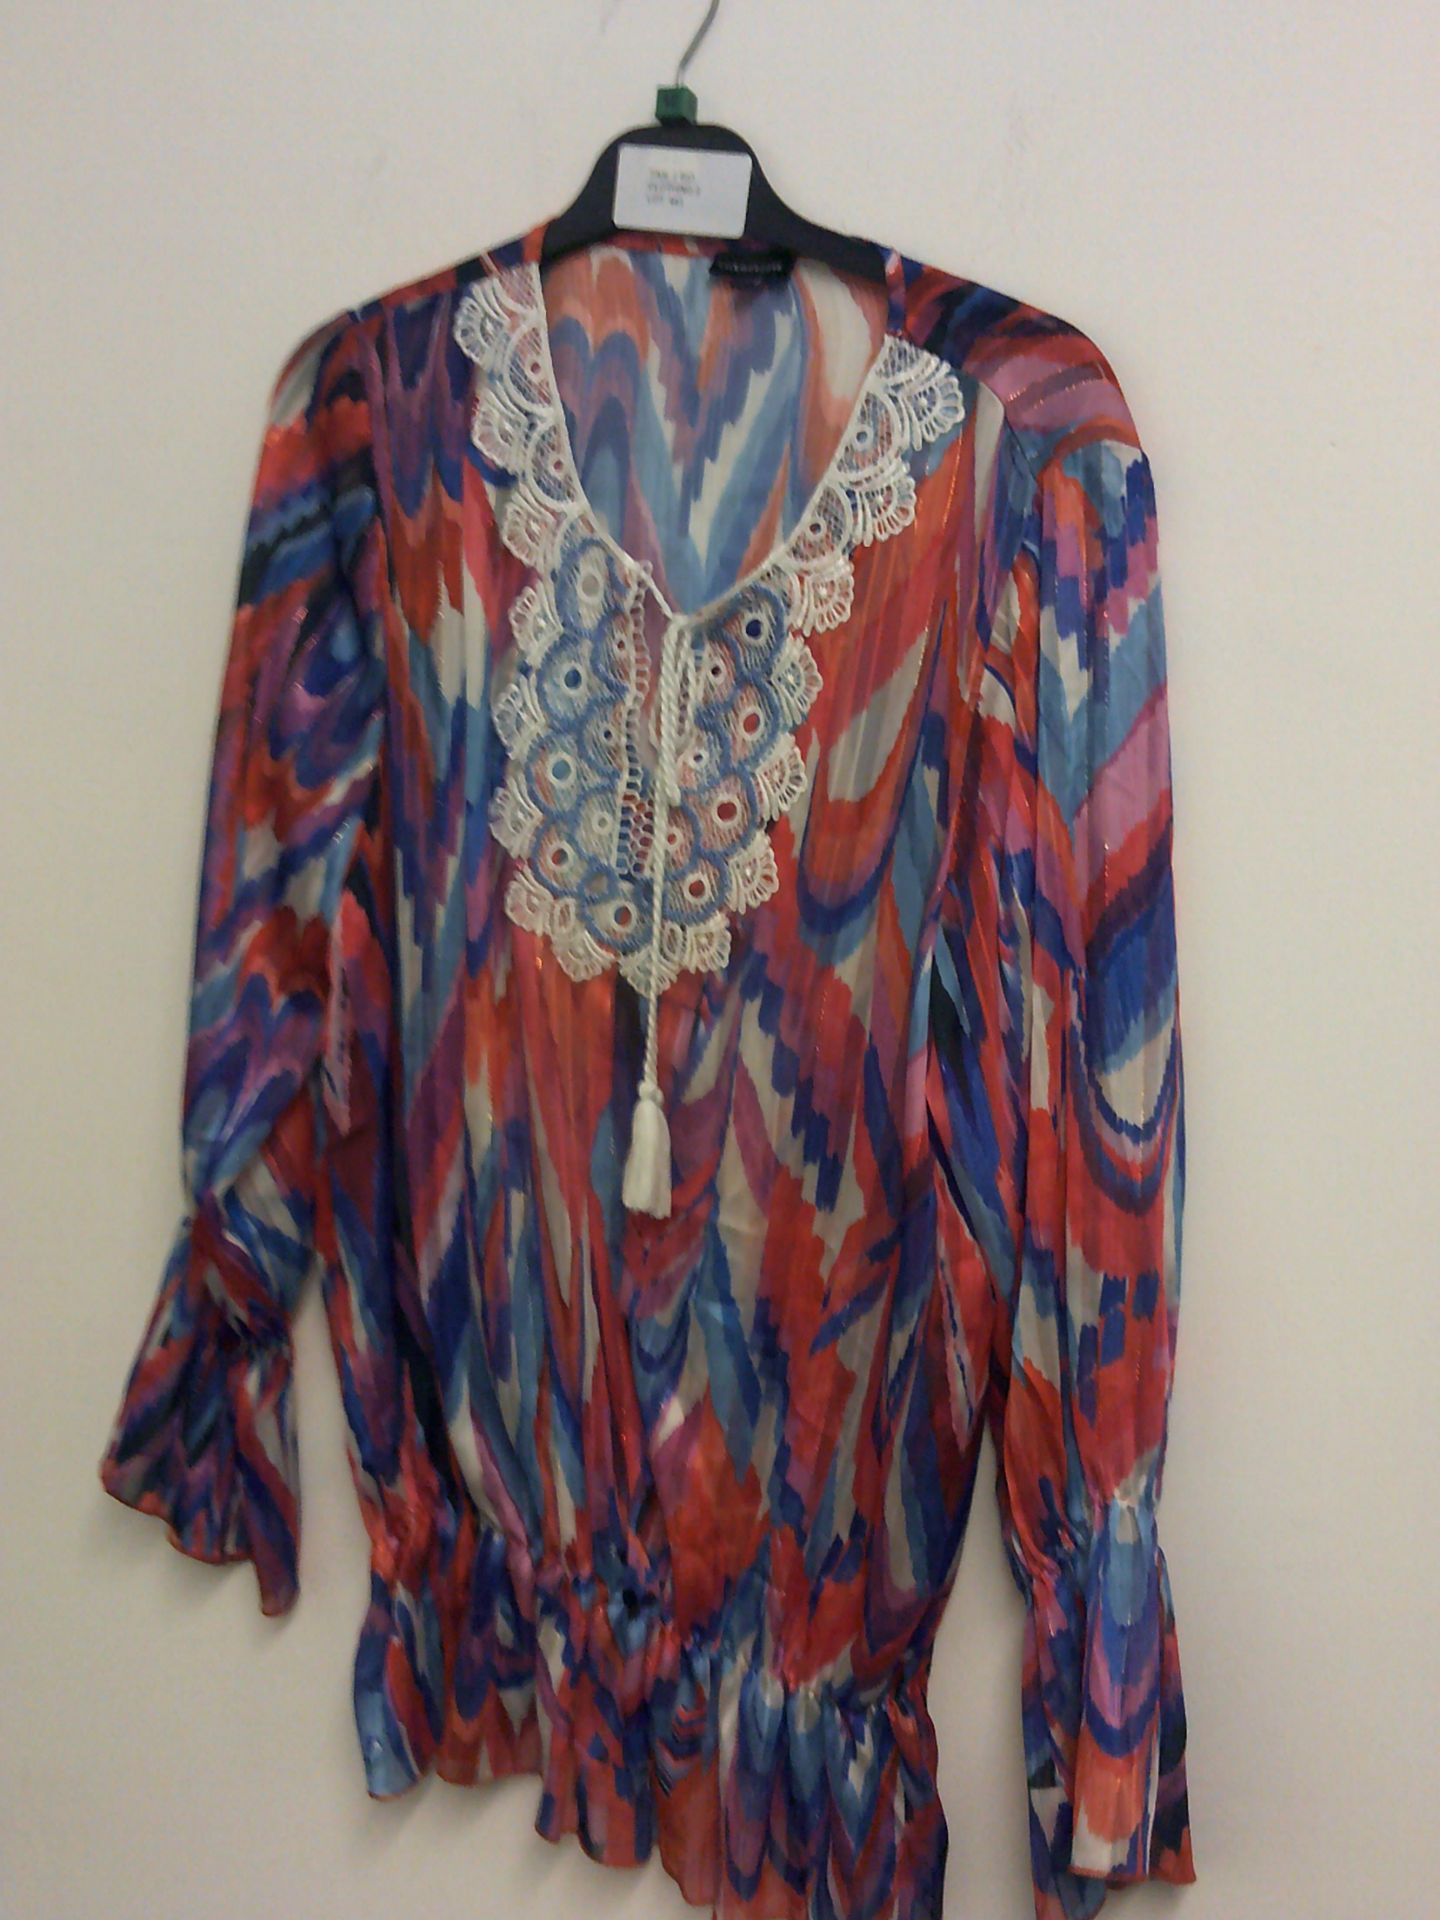 KALEIDOSCOPE LADIES PATTERNED BLOUSE WITH SPARKLE ROPE TIE NECKLINE SIZE 12